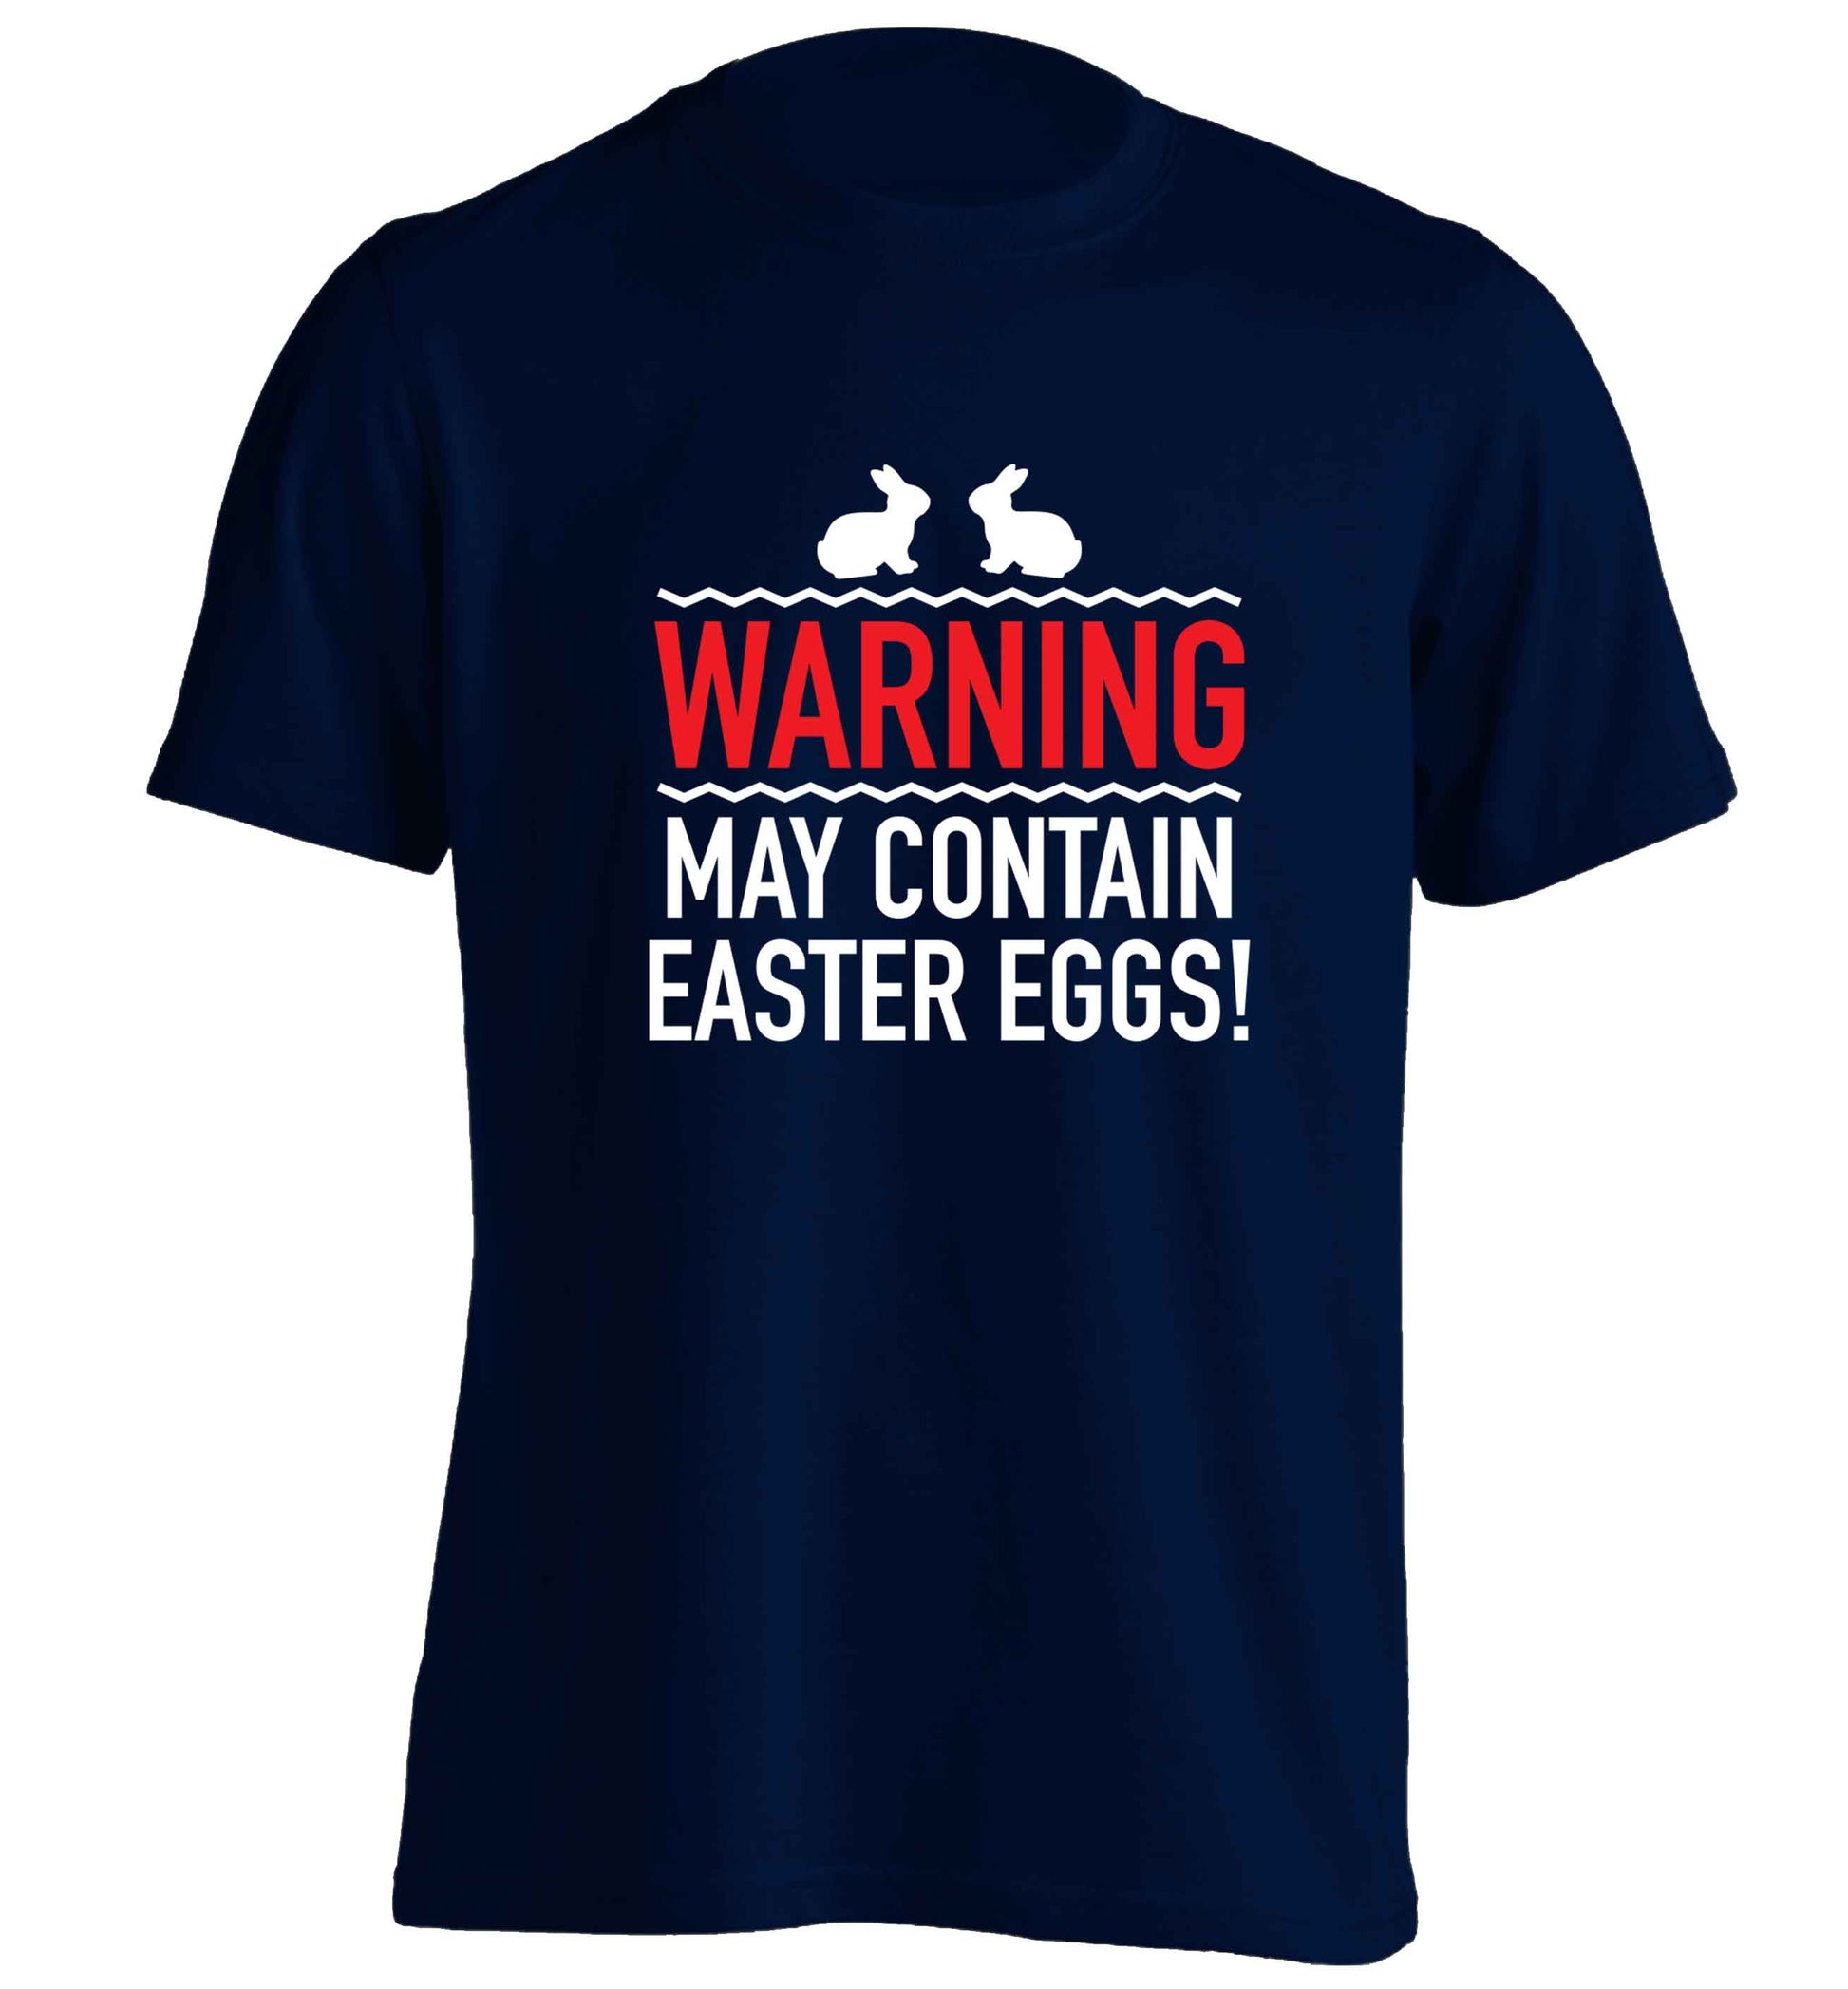 Warning may contain Easter eggs adults unisex navy Tshirt 2XL